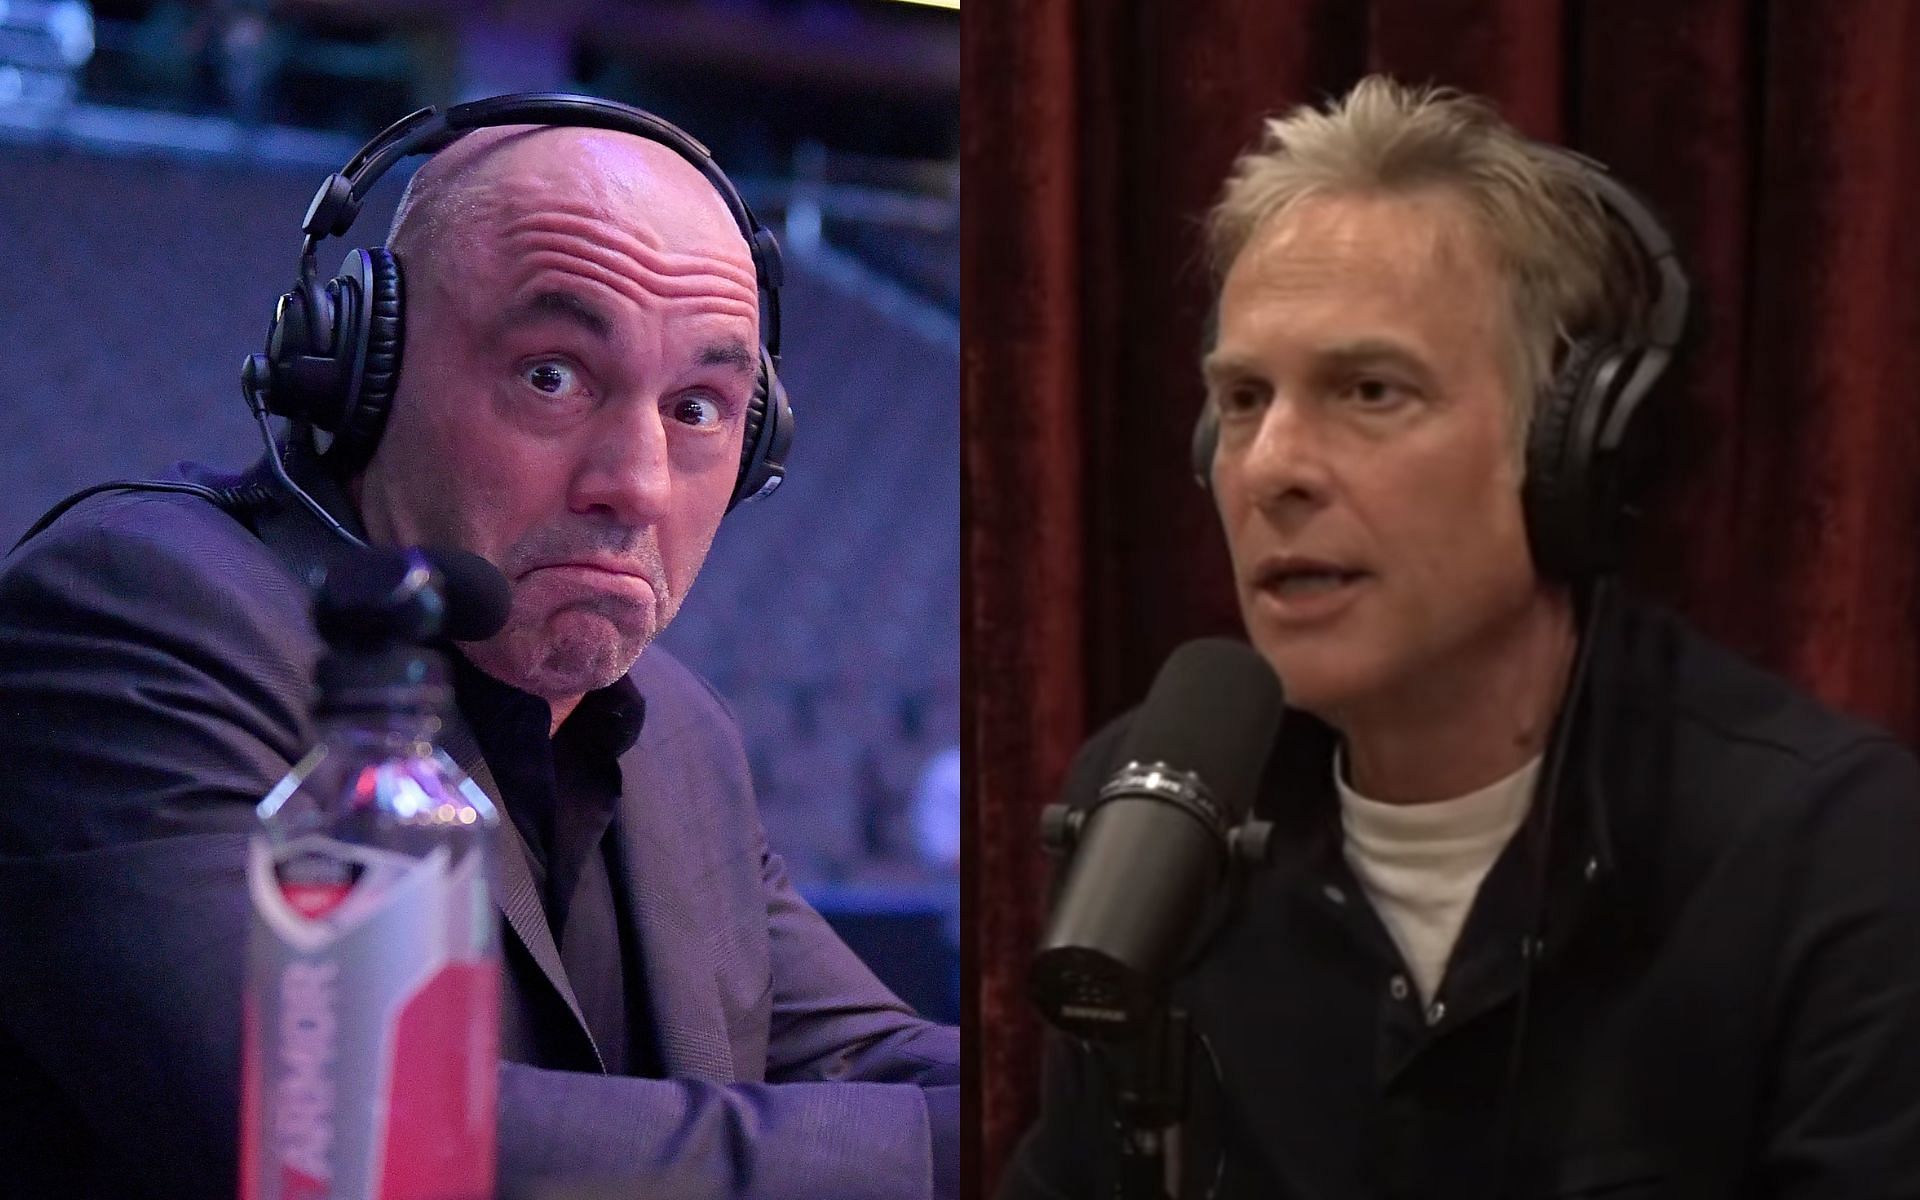 Joe Rogan (Left) and Adam Curry (Right) [Image courtesy: Getty Images and PowerfulJRE YouTube channel]